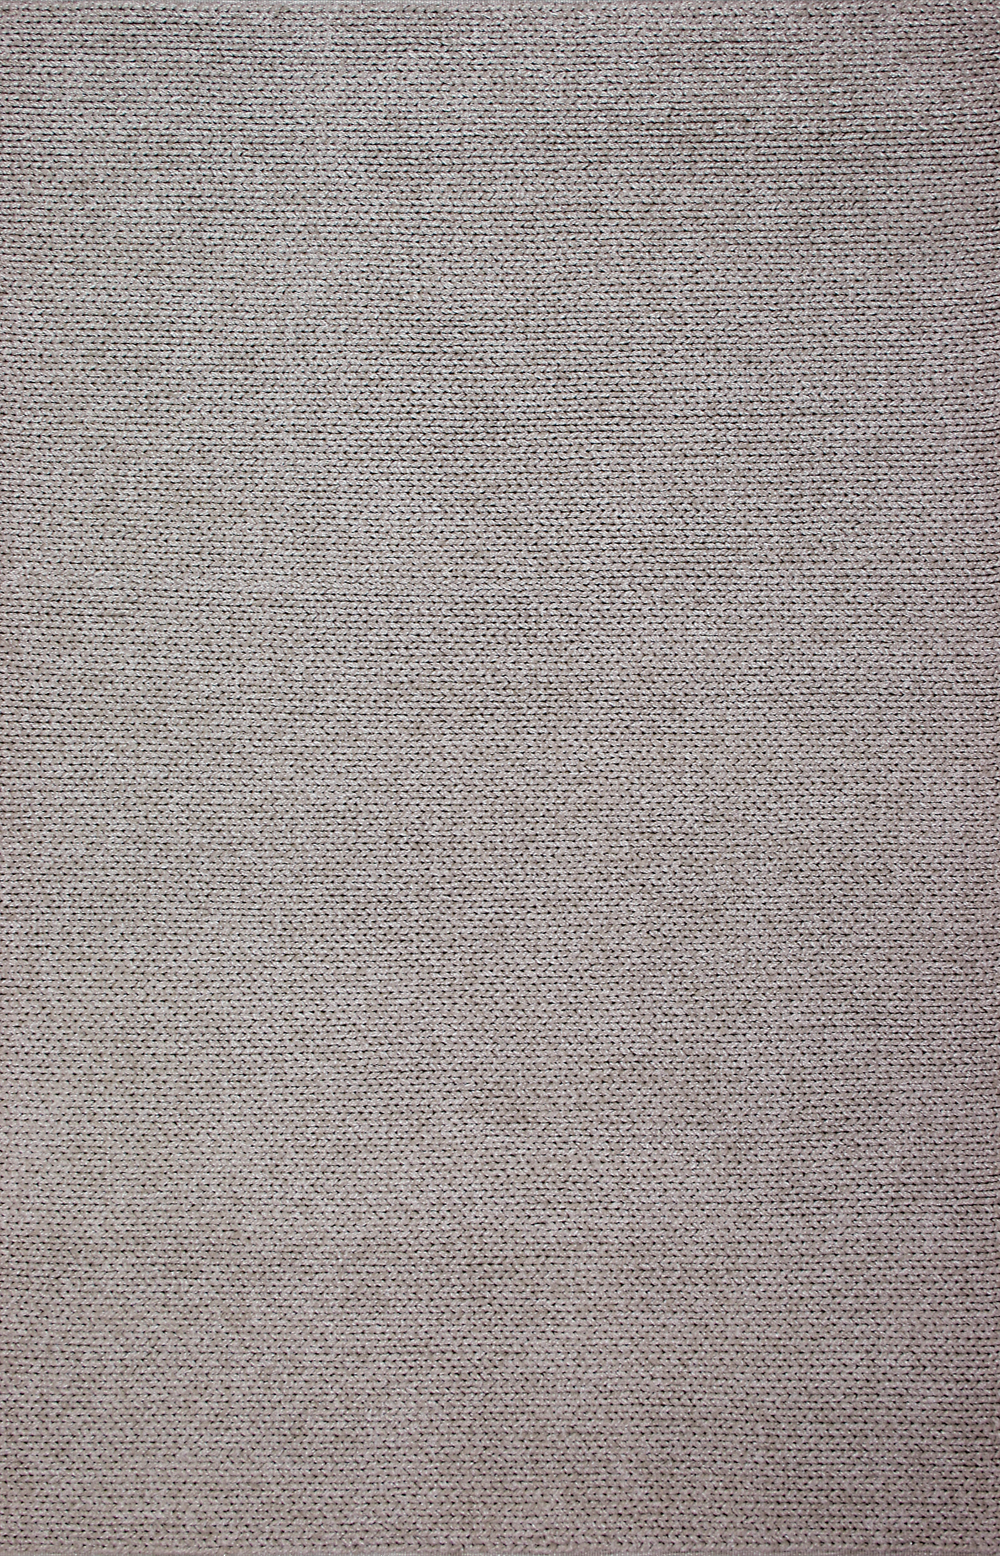 Contemporary & Transitional Rugs Delta DE-93 Ash Lt. Grey - Grey & Camel - Taupe Hand Woven Rug